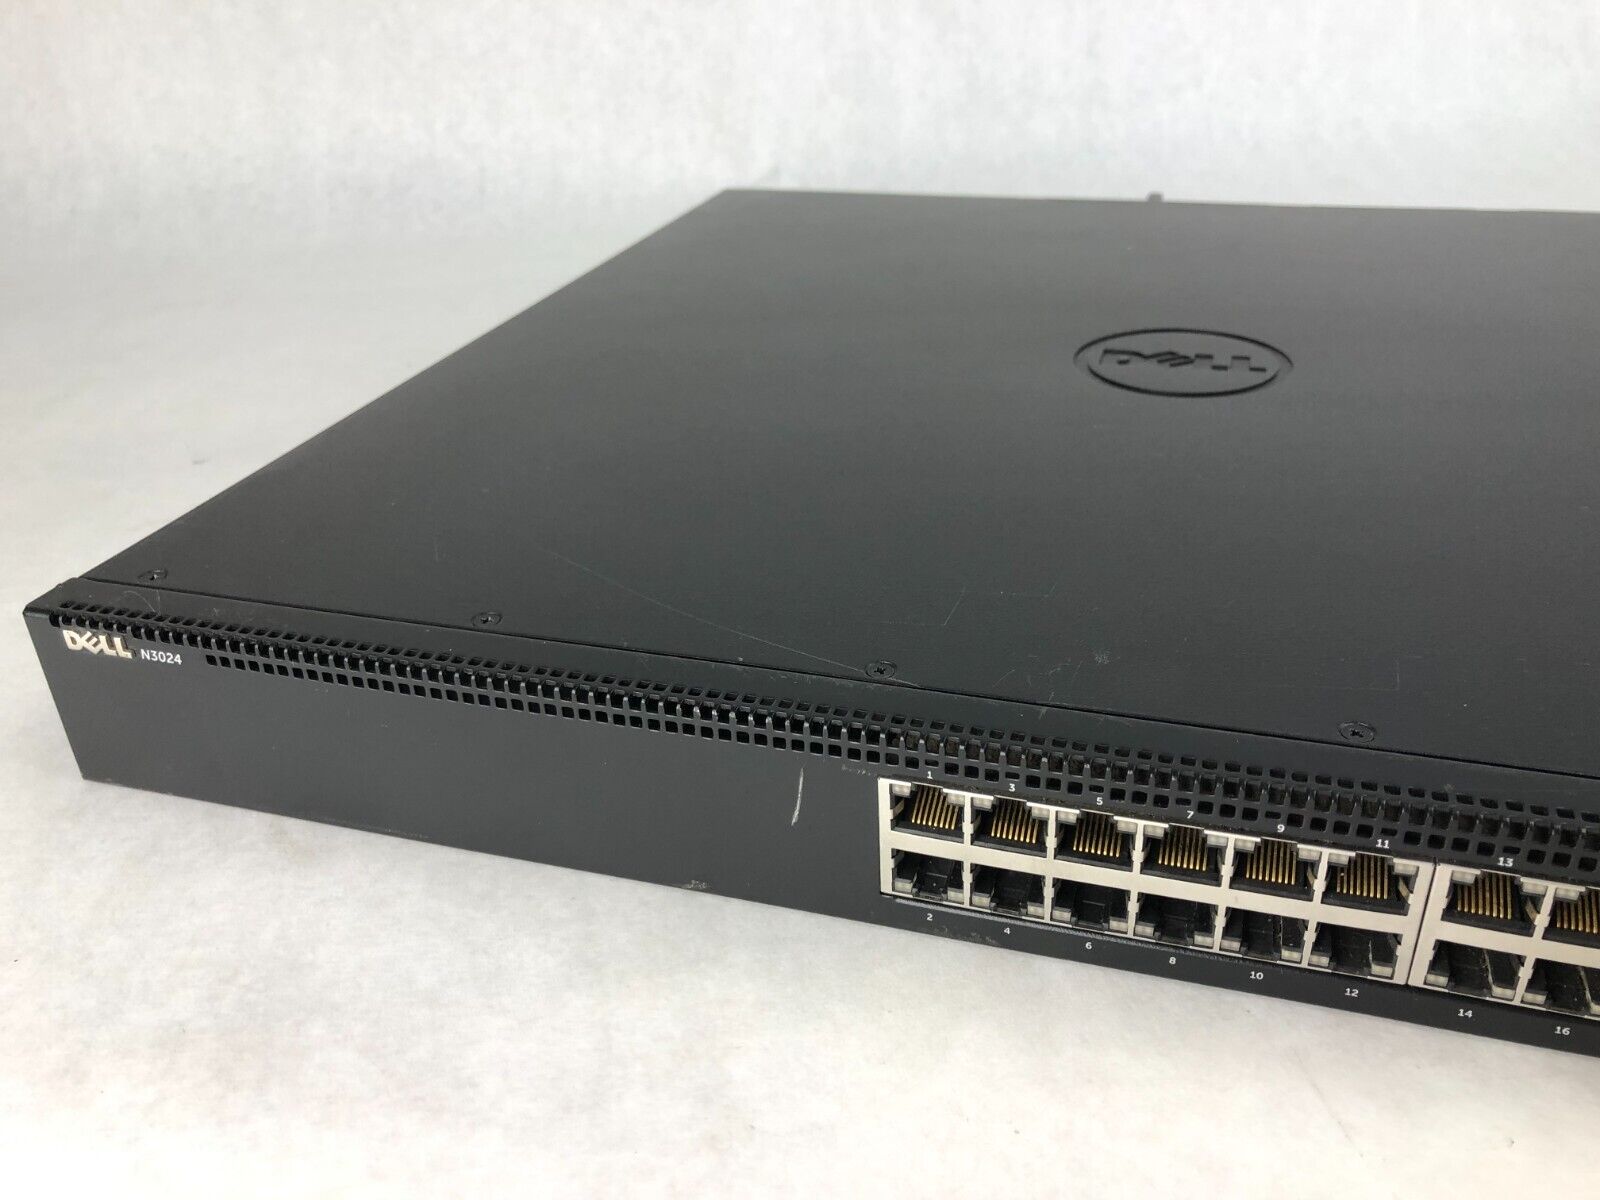 Dell Networking N3024 24 Port Rack Mountable Ethernet Switch No Rails